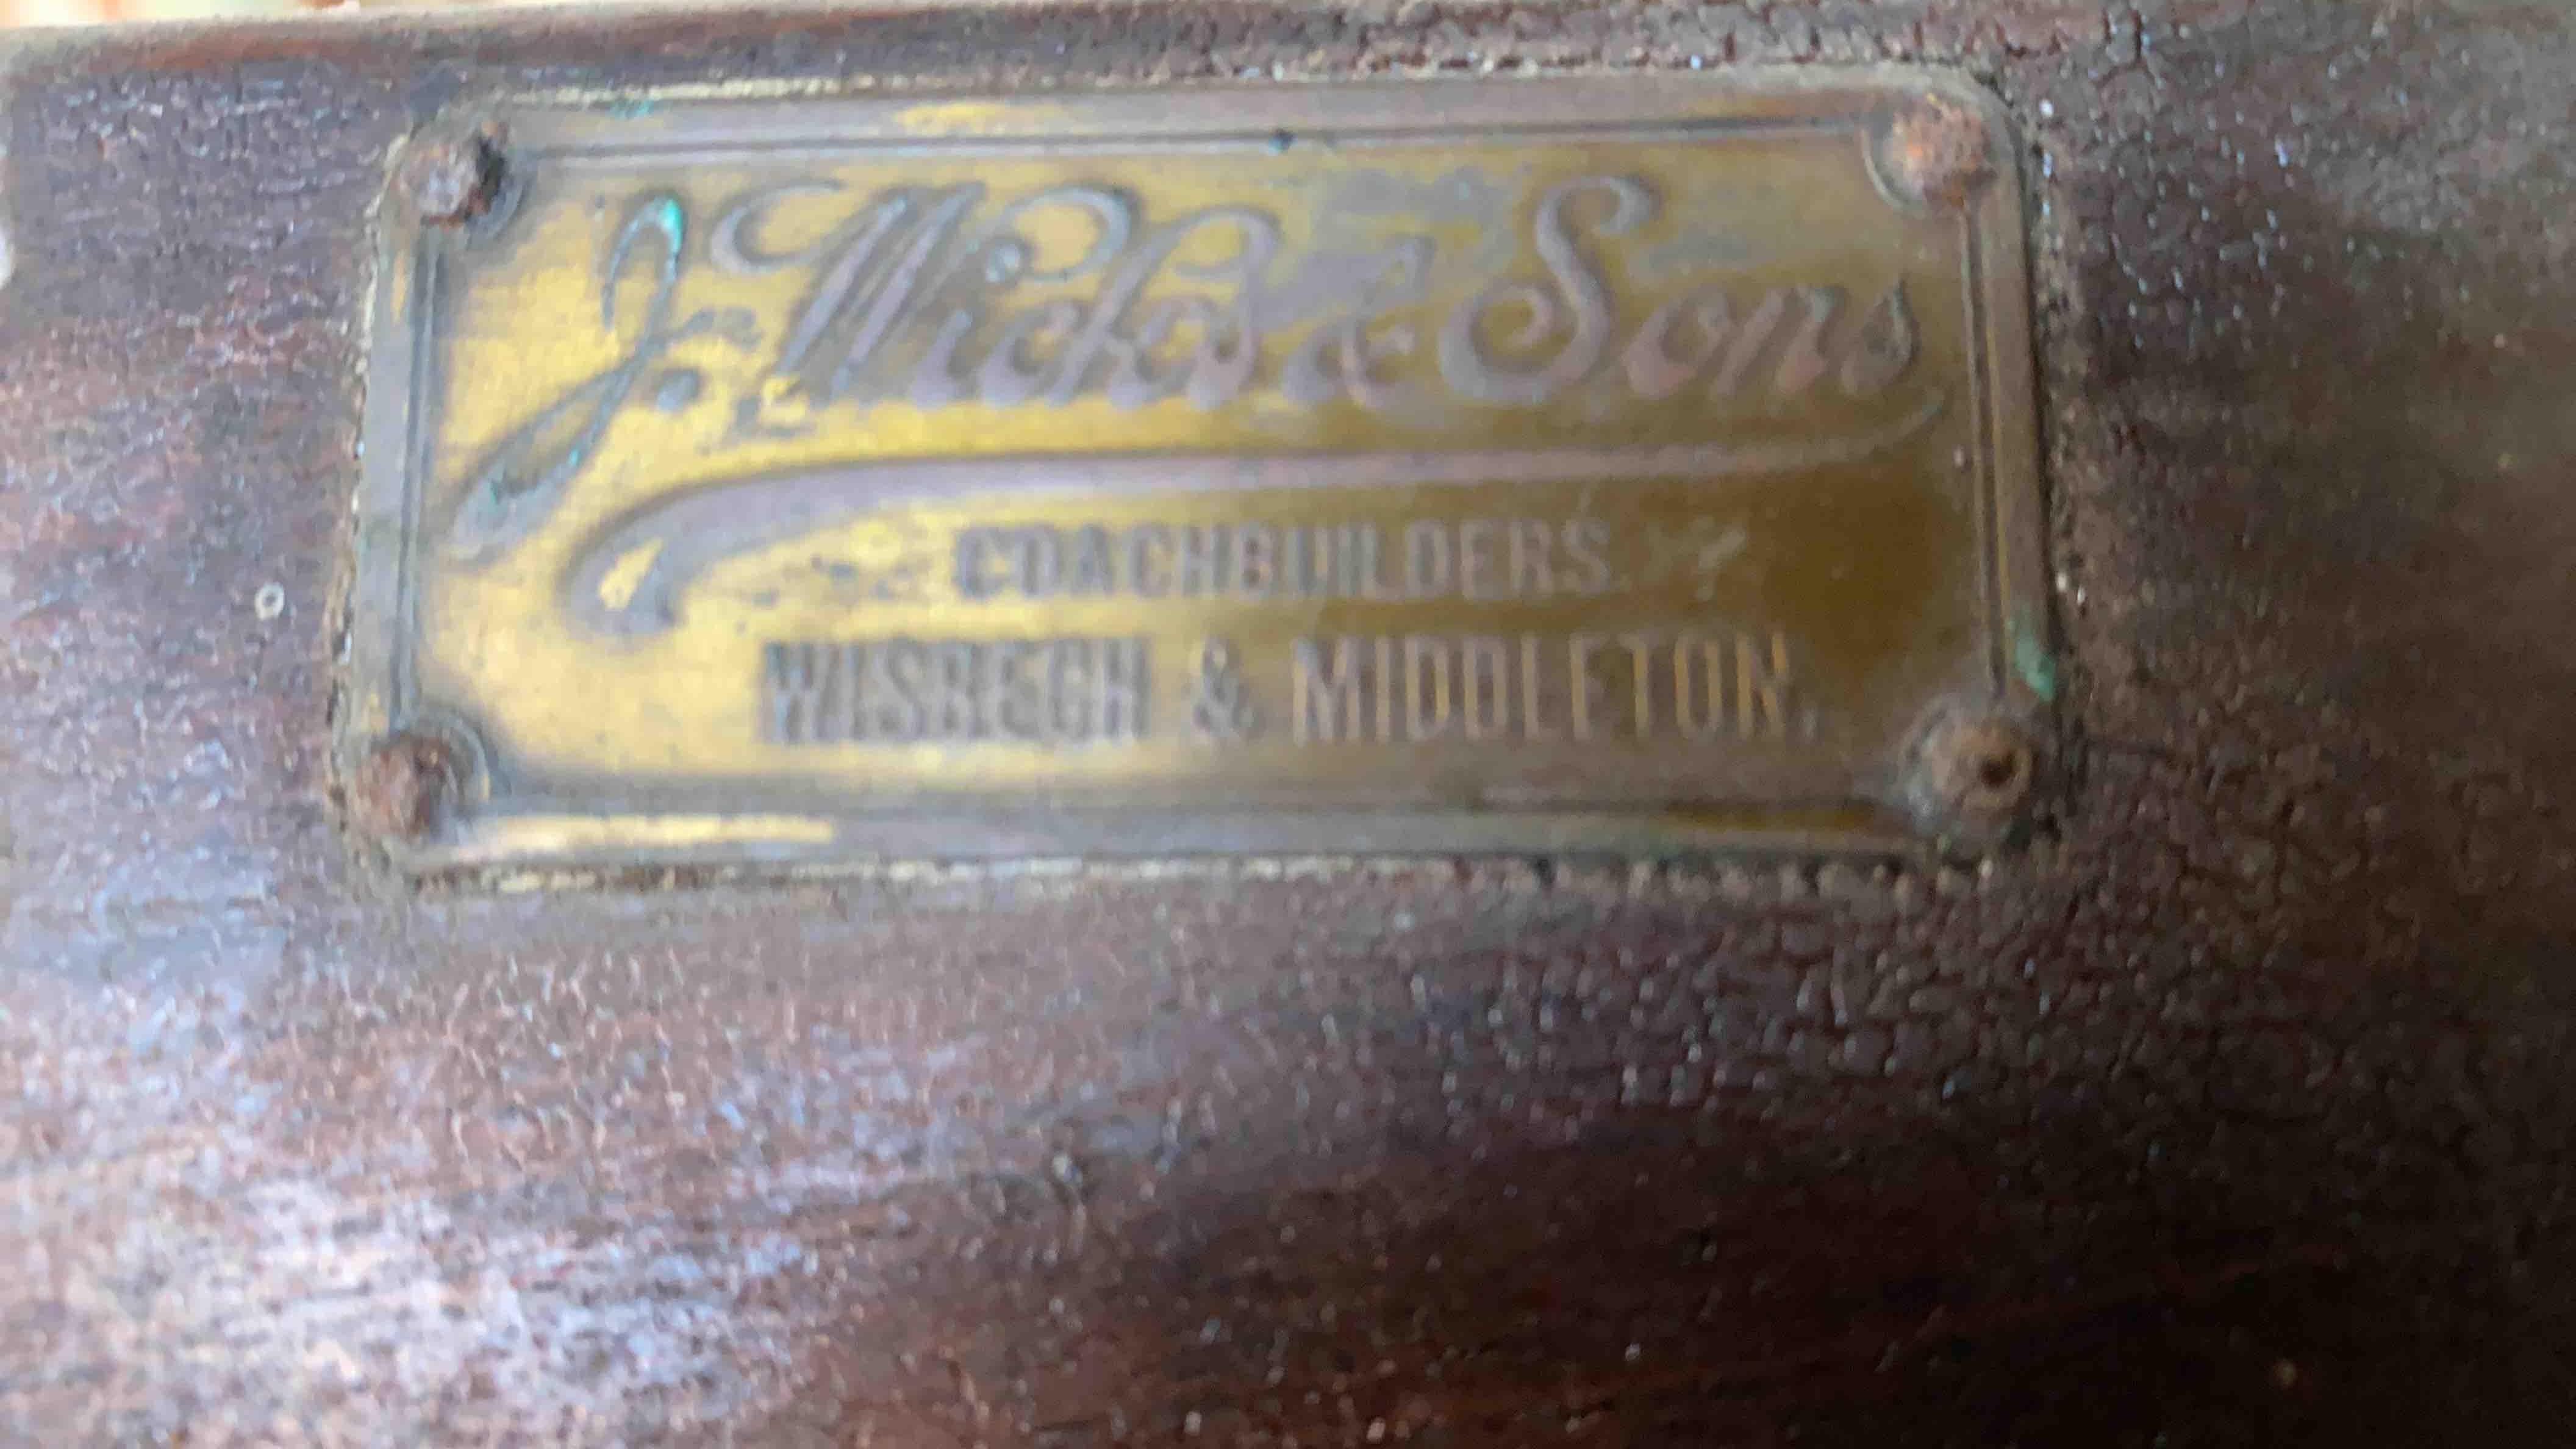 GOVERNESS CAR built by Wicks & Sons of Wisbech and Middleton to suit 16hh - Image 4 of 5